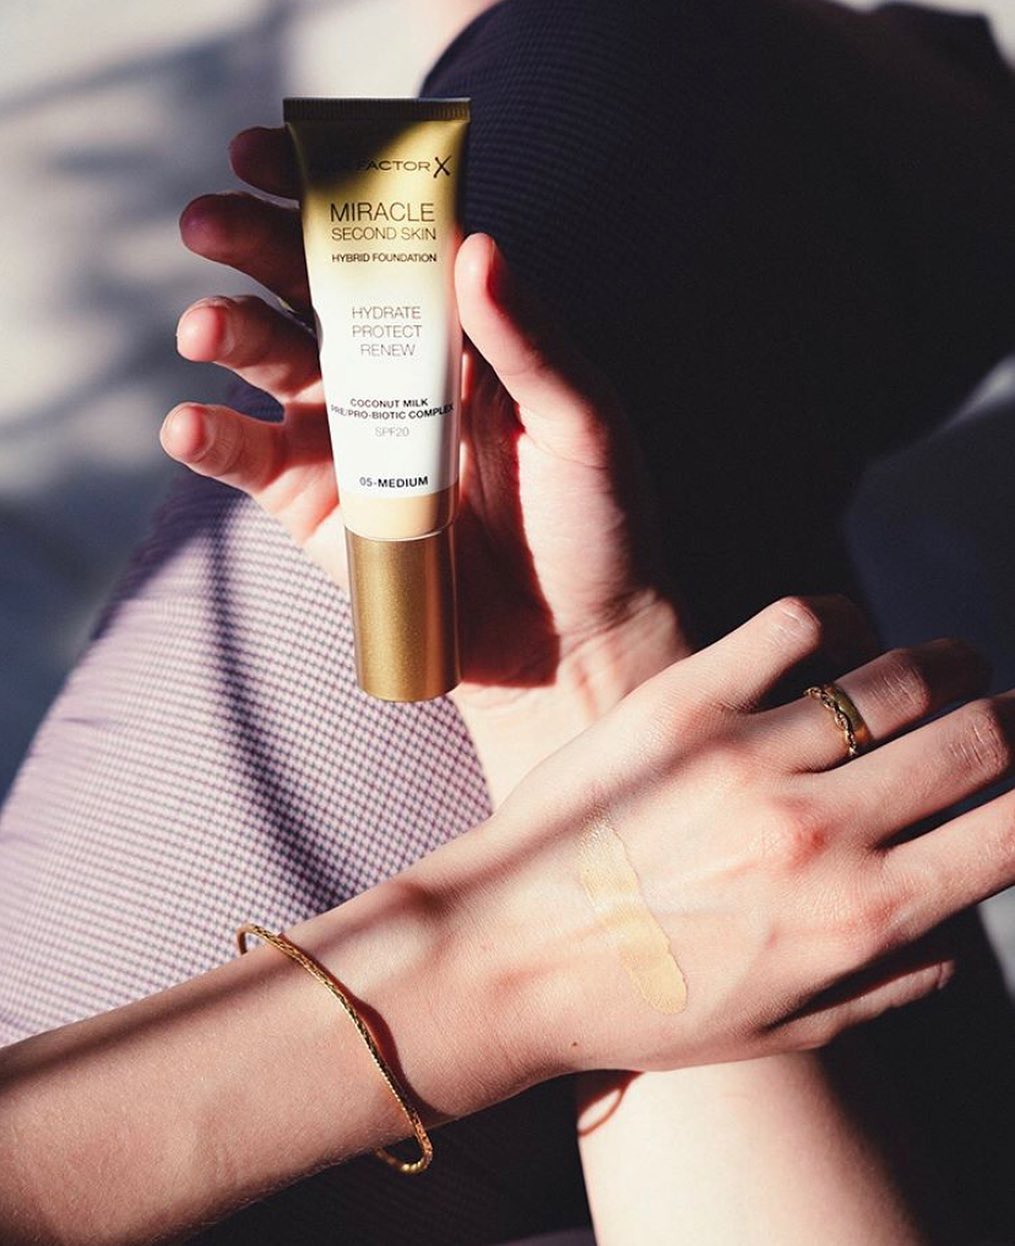 Max Factor - Hydrate.Protect.Renew 🙌 NEW Miracle Second Skin foundation is infused with pre & pro biotics to help restore skin’s natural defences 👊 📸 @dinatokio 
#MiracleSecondSkin#SecondSkin #Foundat...